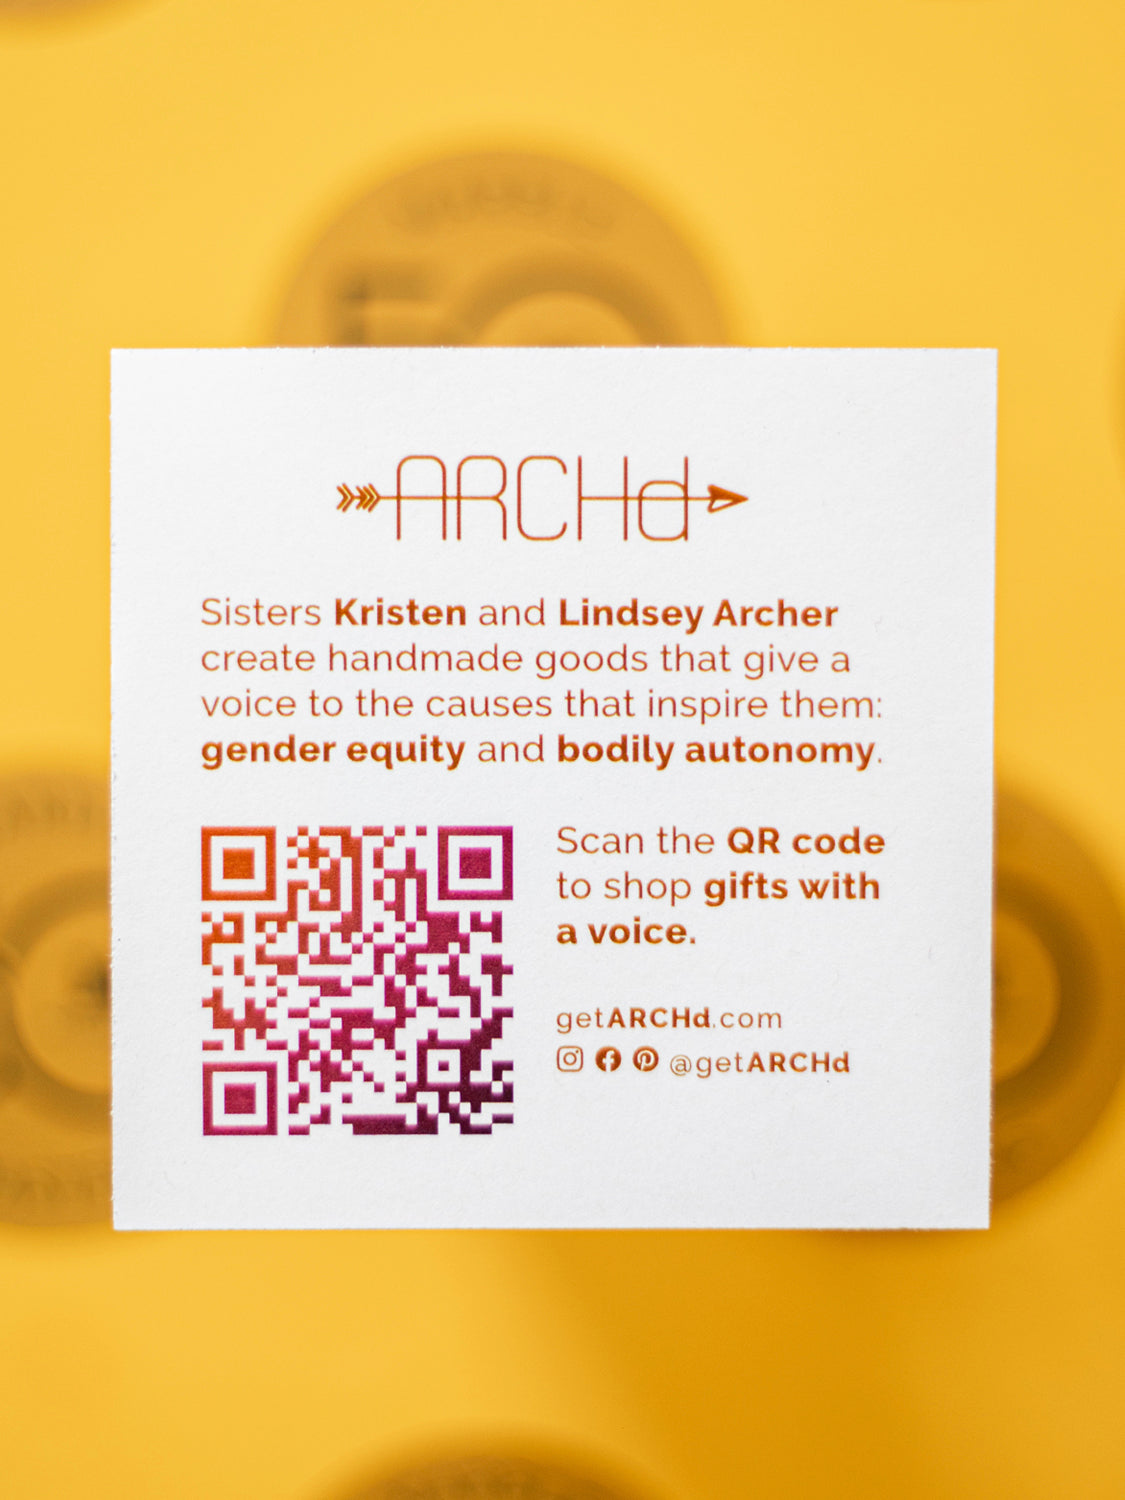 ARCHd info card with QR code on gold background